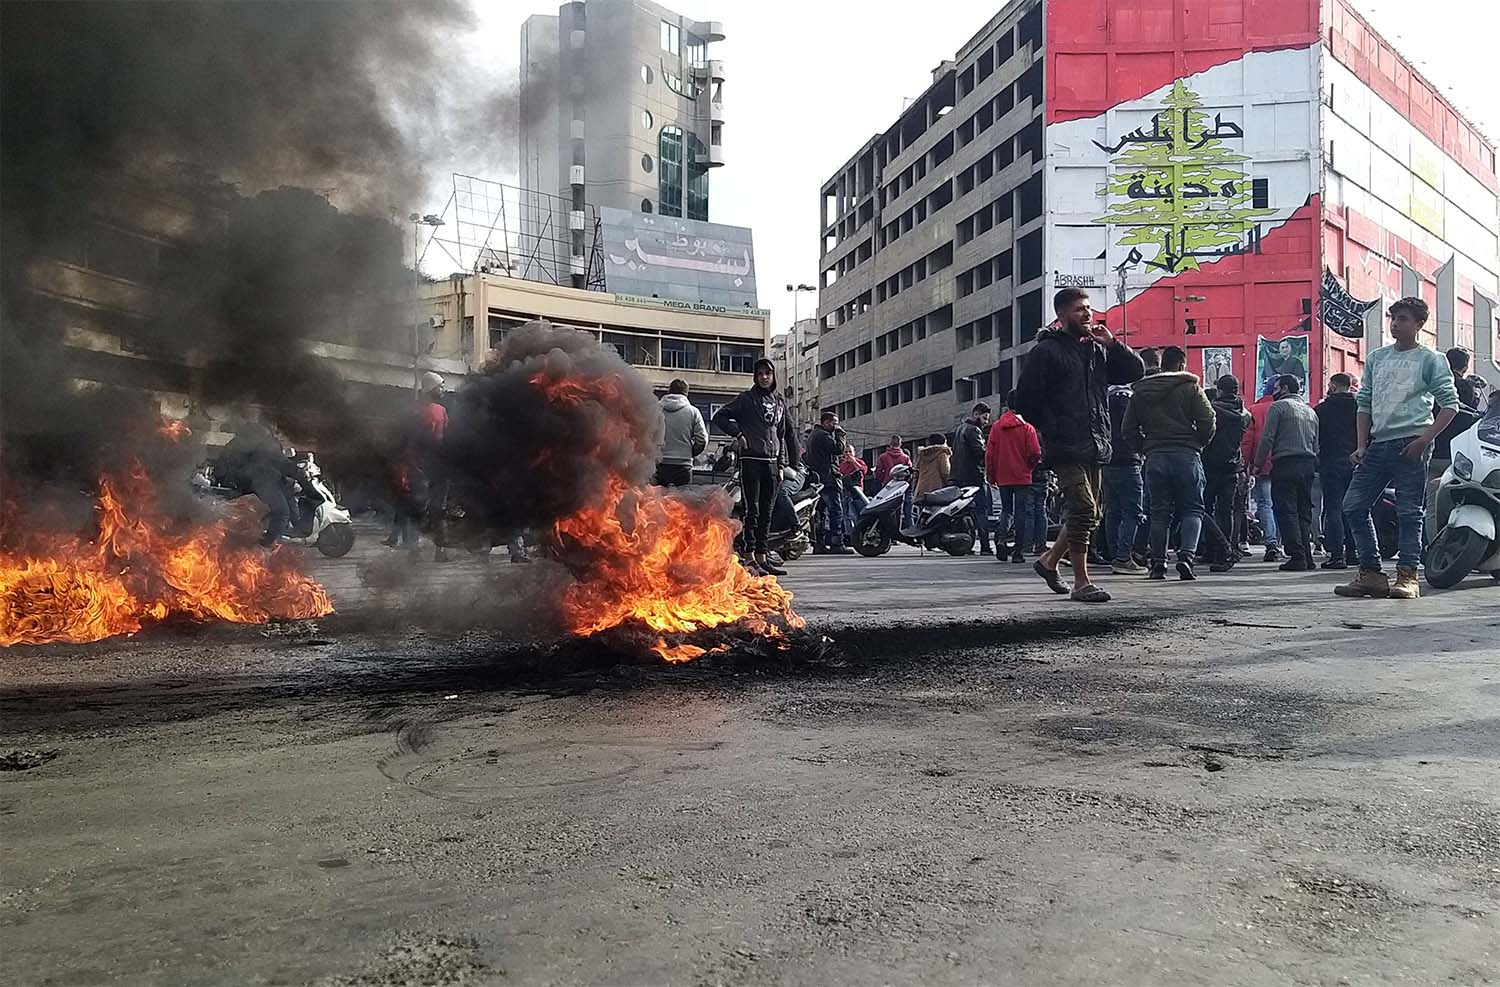 Demonstrators gather near burning tires during a protest against the lockdown and worsening economic conditions